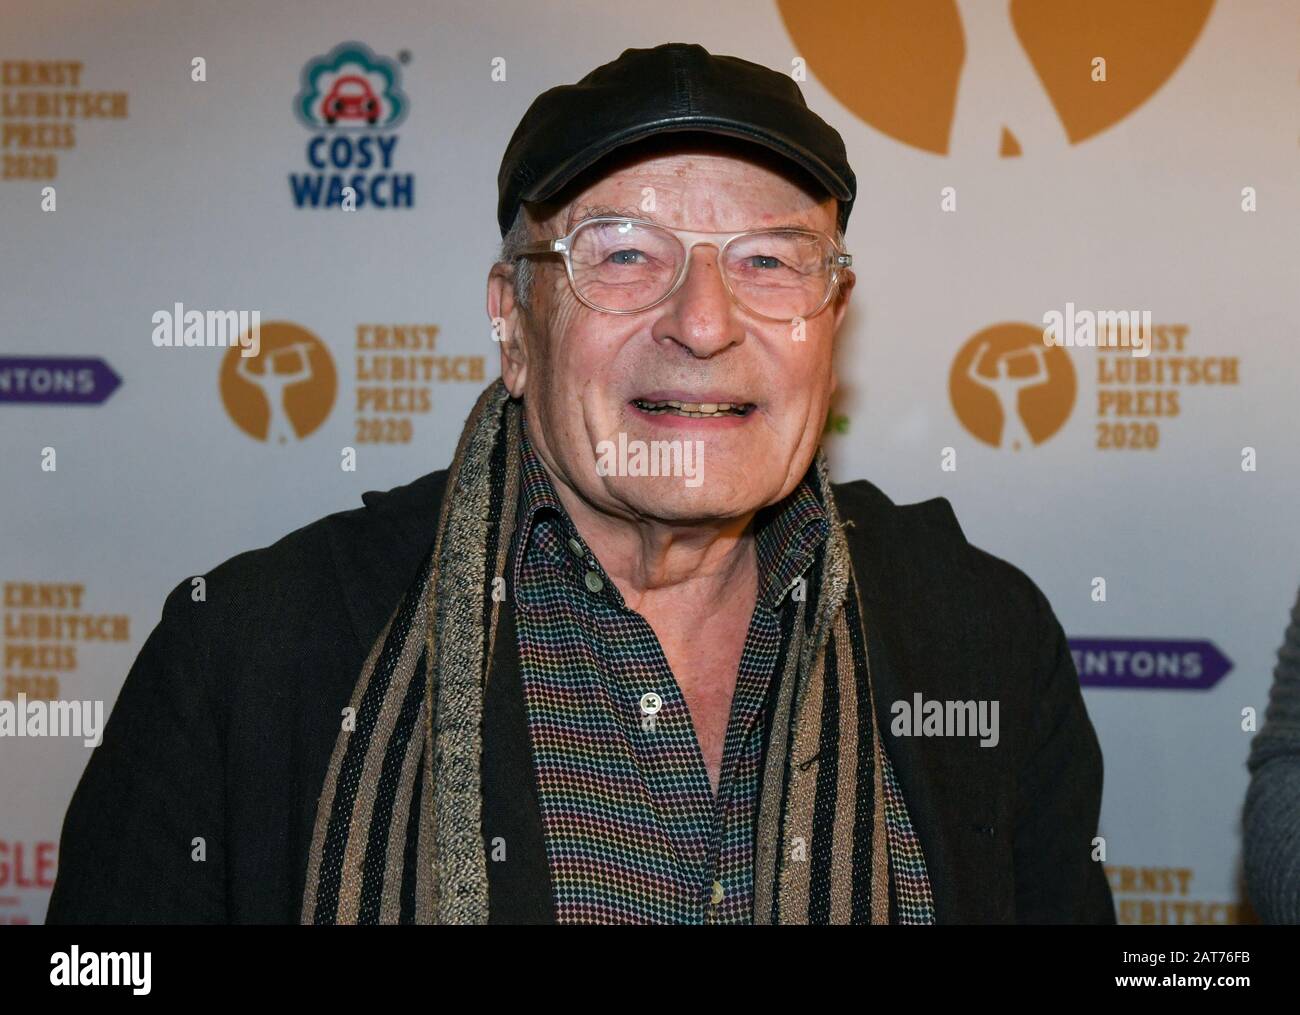 Berlin, Germany. 29th Jan, 2020. Volker Schlöndorff at the presentation of the Ernst Lubitsch Prize in the Babylon cinema. The Club of Film Journalists Berlin traditionally honours the best comedic performance in a German-language cinema film on 29 January, the birthday of Ernst Lubitsch. Credit: Jens Kalaene/dpa-Zentralbild/dpa/Alamy Live News Stock Photo